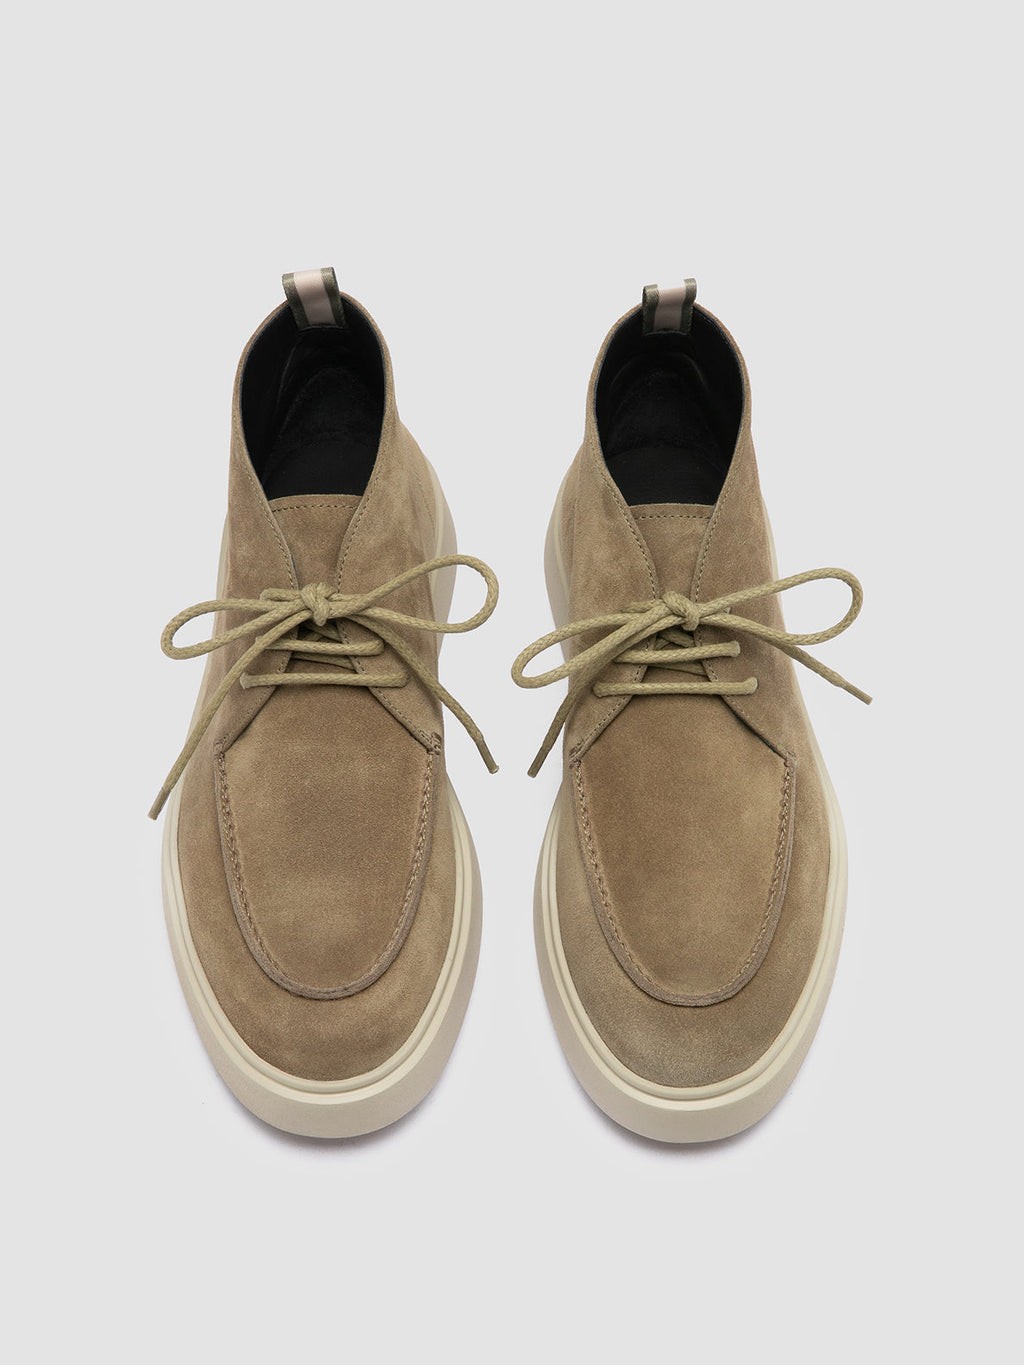 FRAME 002 - Taupe Suede Chukka Boots